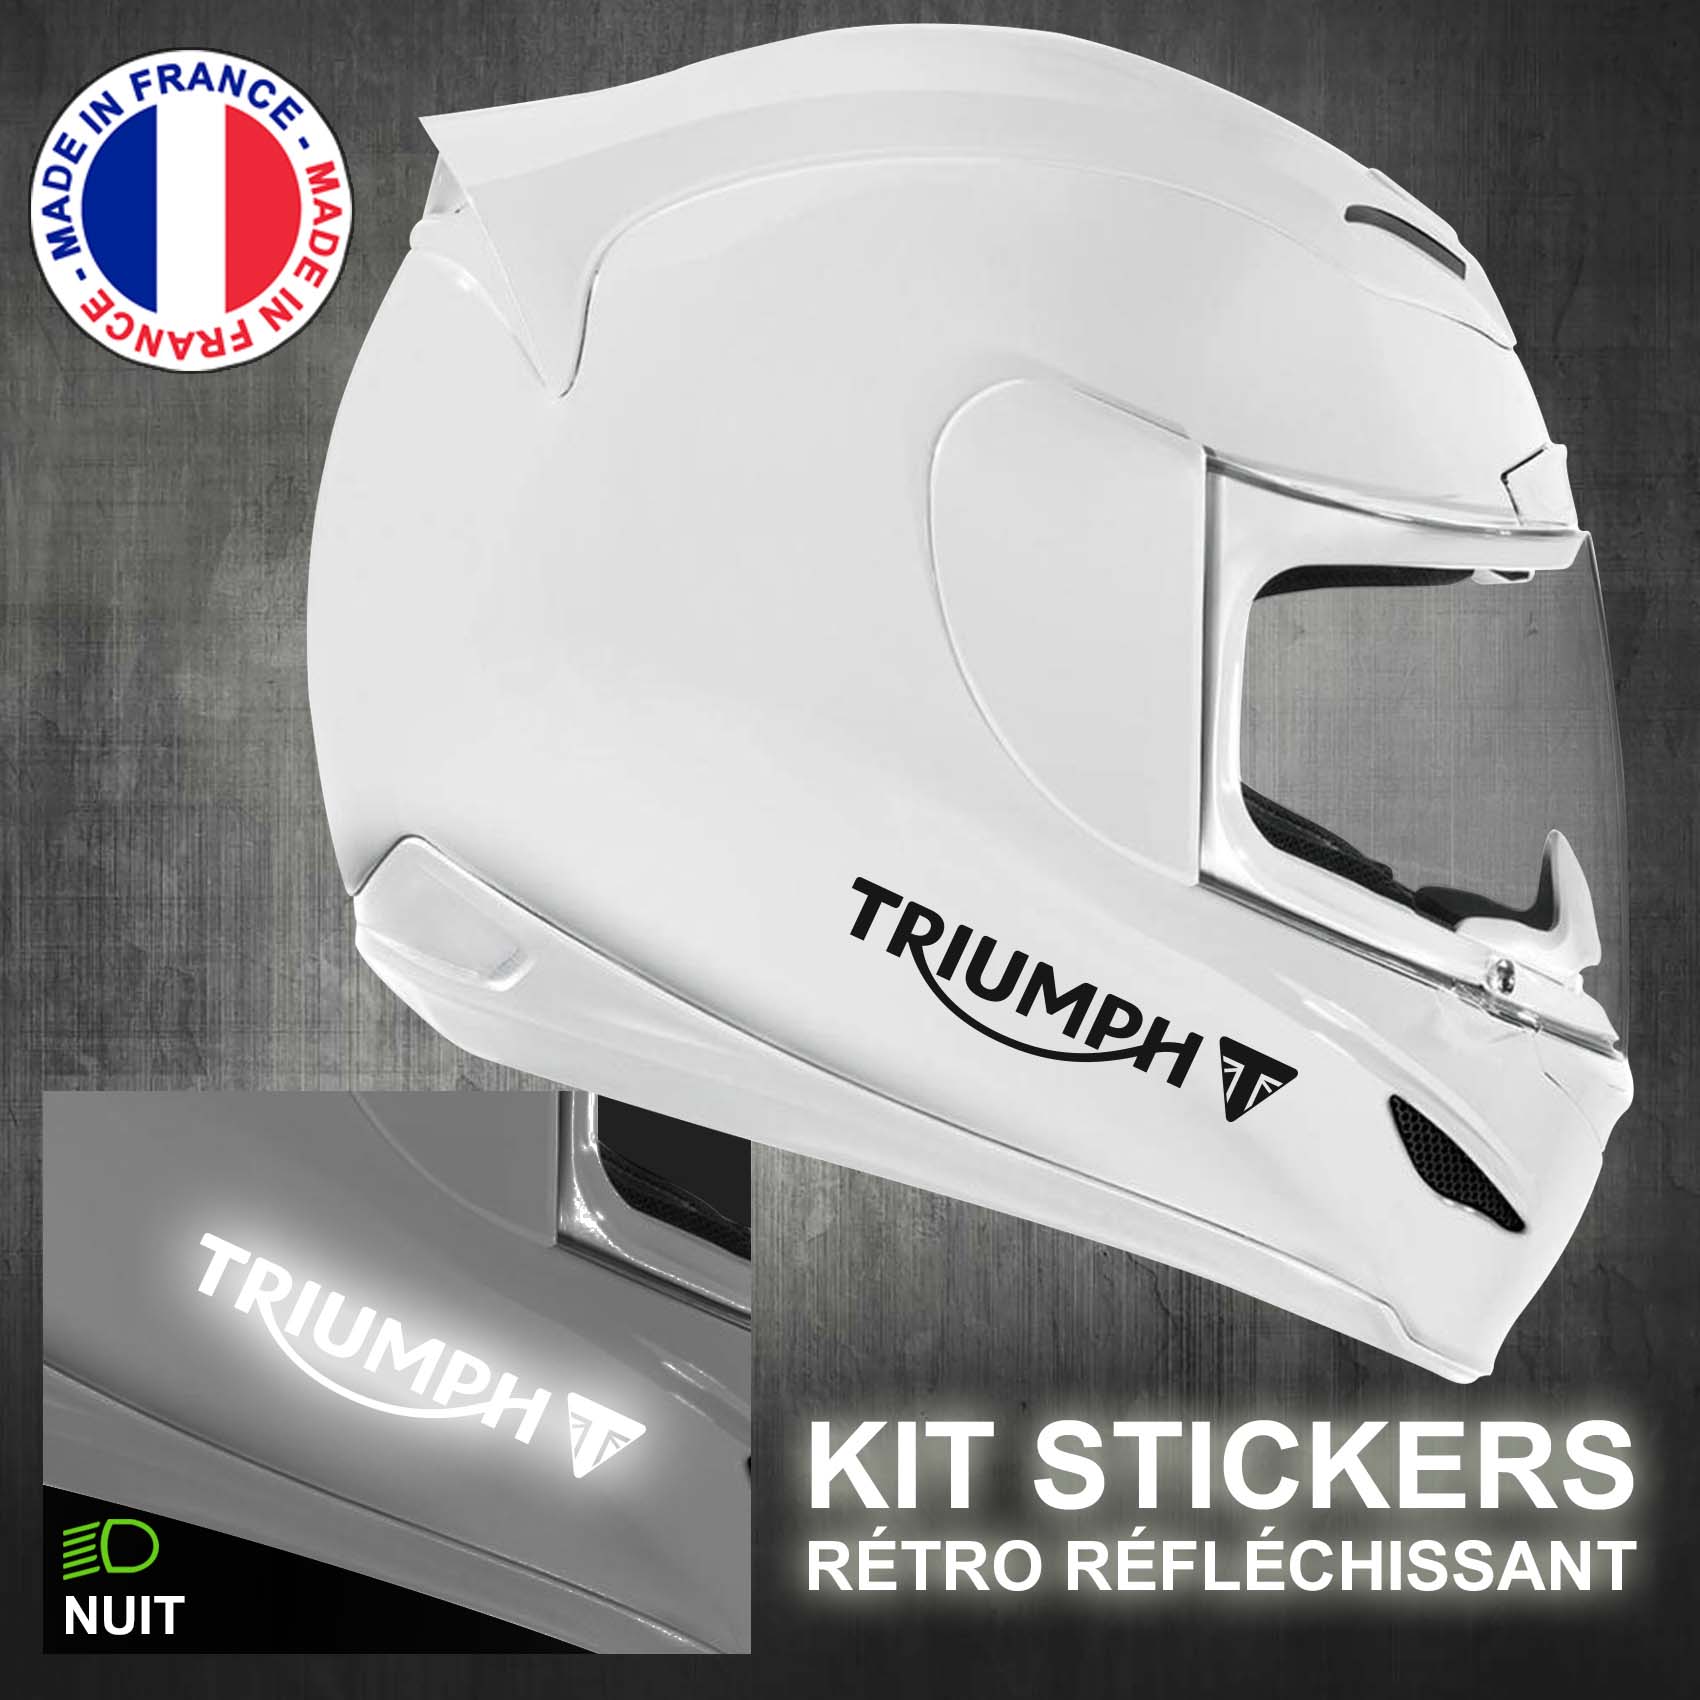 stickers-casque-moto-triumph-ref6-retro-reflechissant-autocollant-blanc-moto-velo-tuning-racing-route-sticker-casques-adhesif-scooter-nuit-securite-decals-personnalise-personnalisable-min